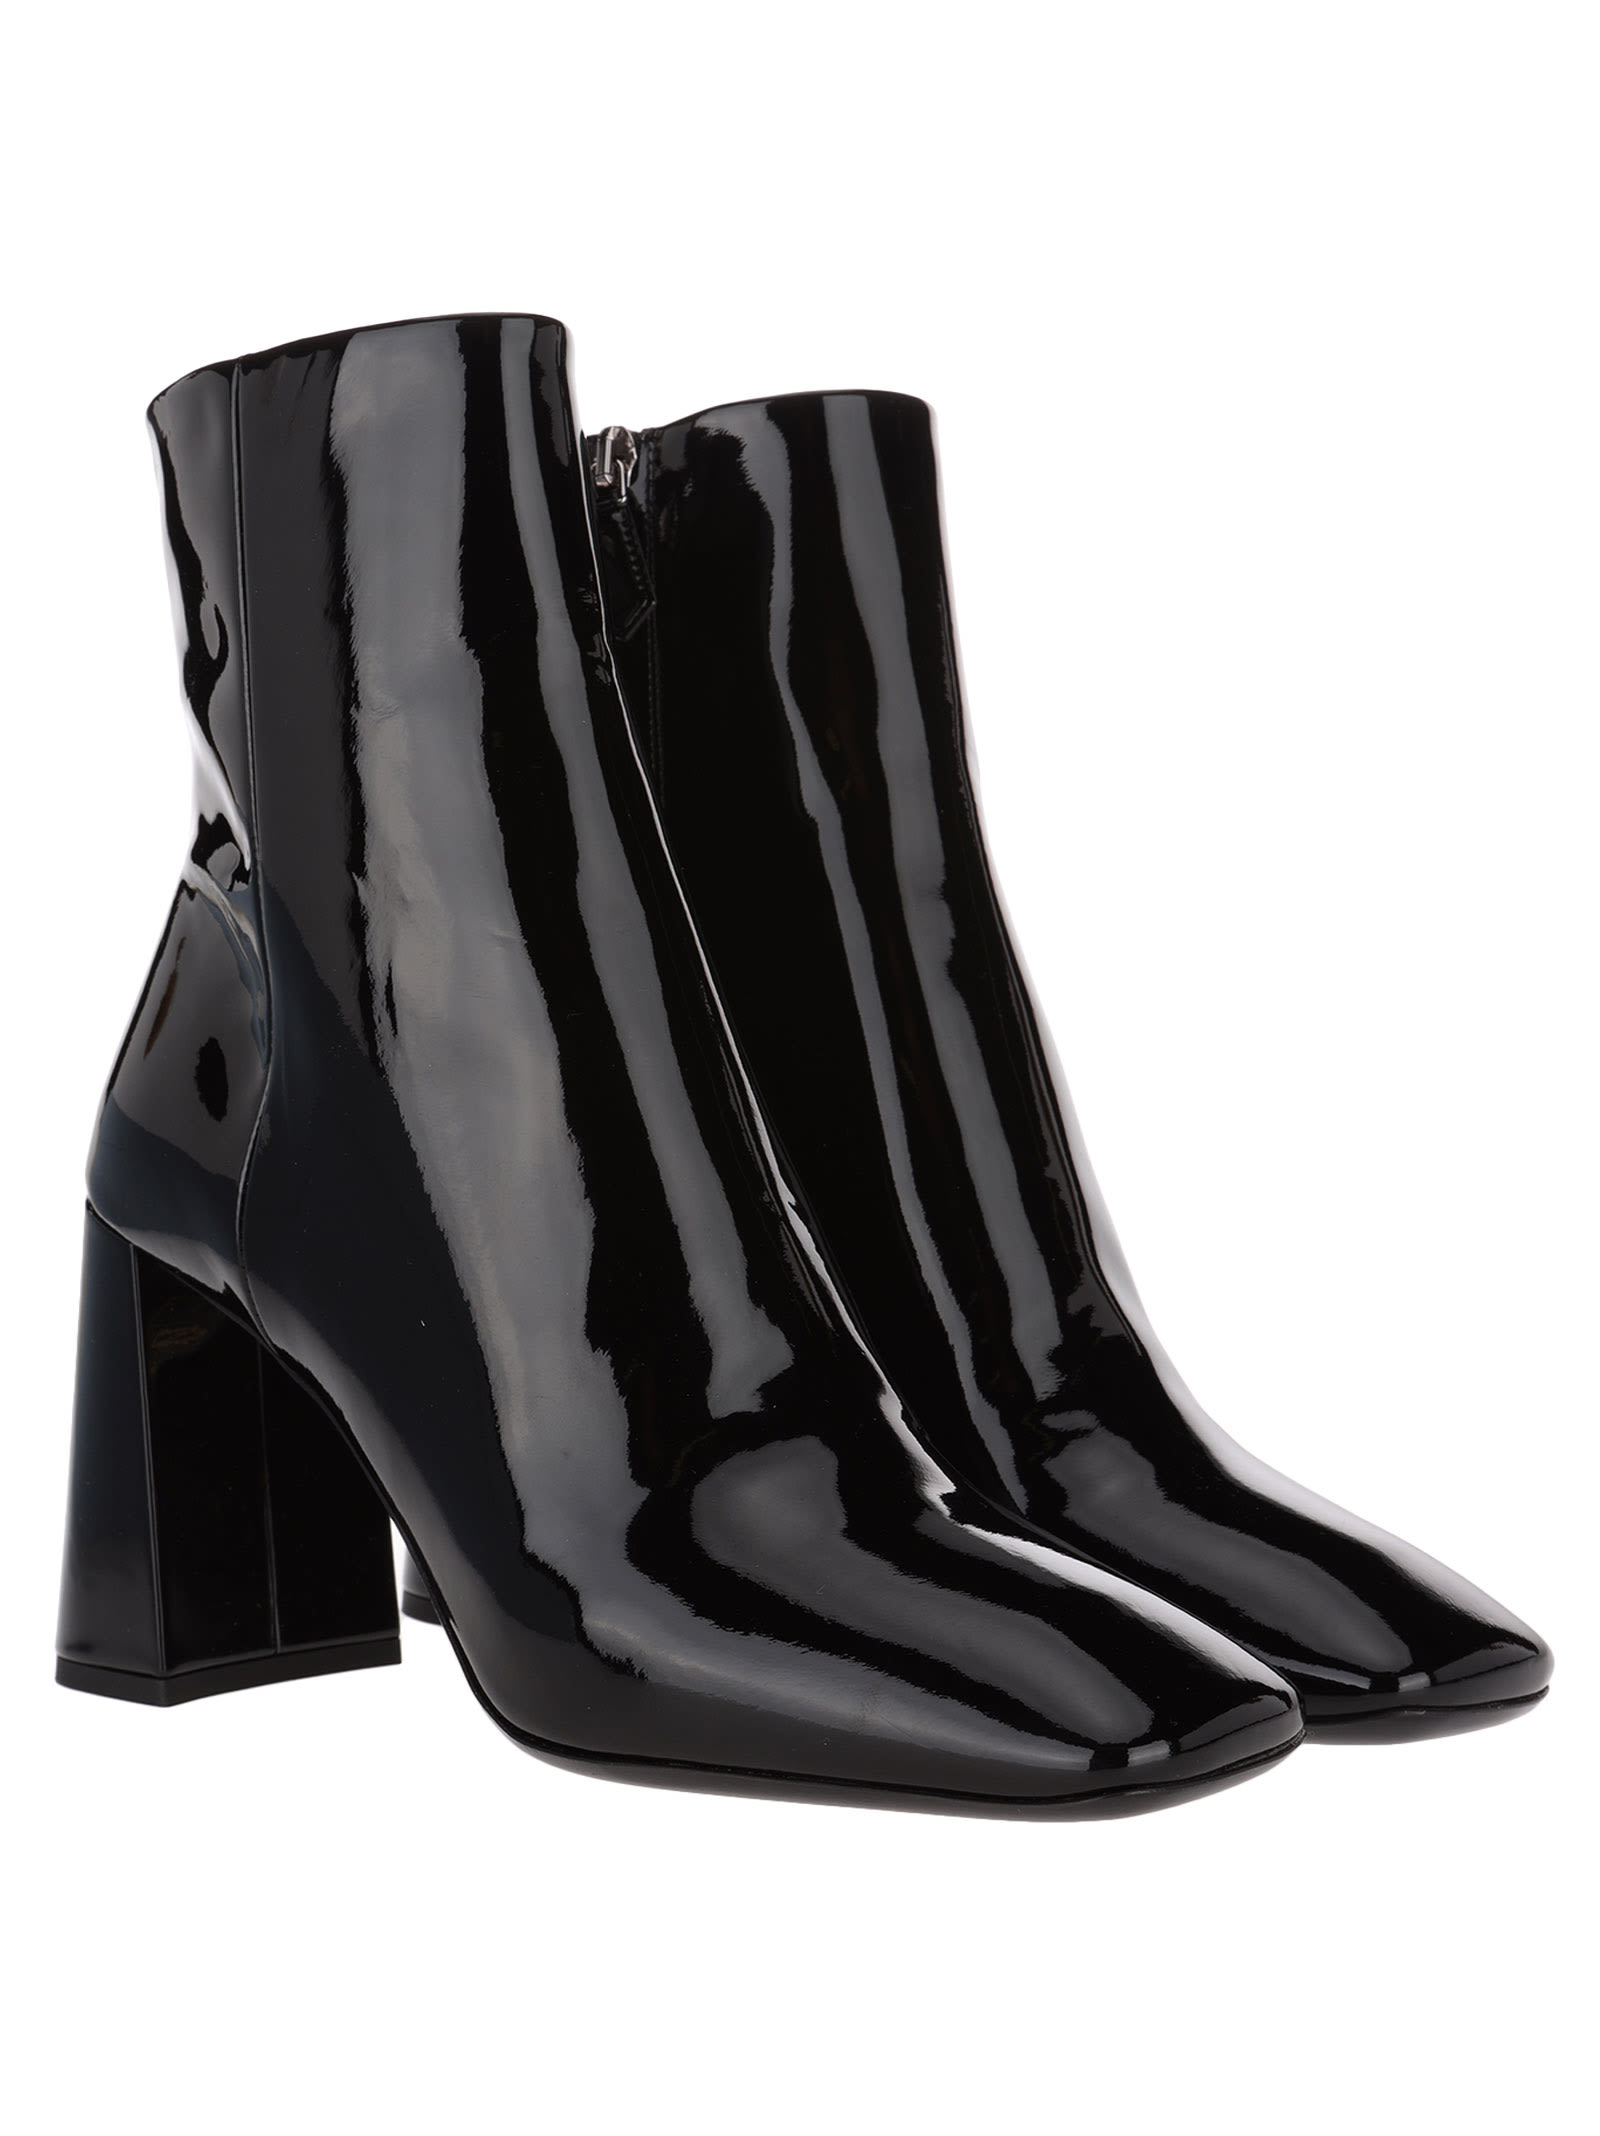 prada patent leather ankle boots